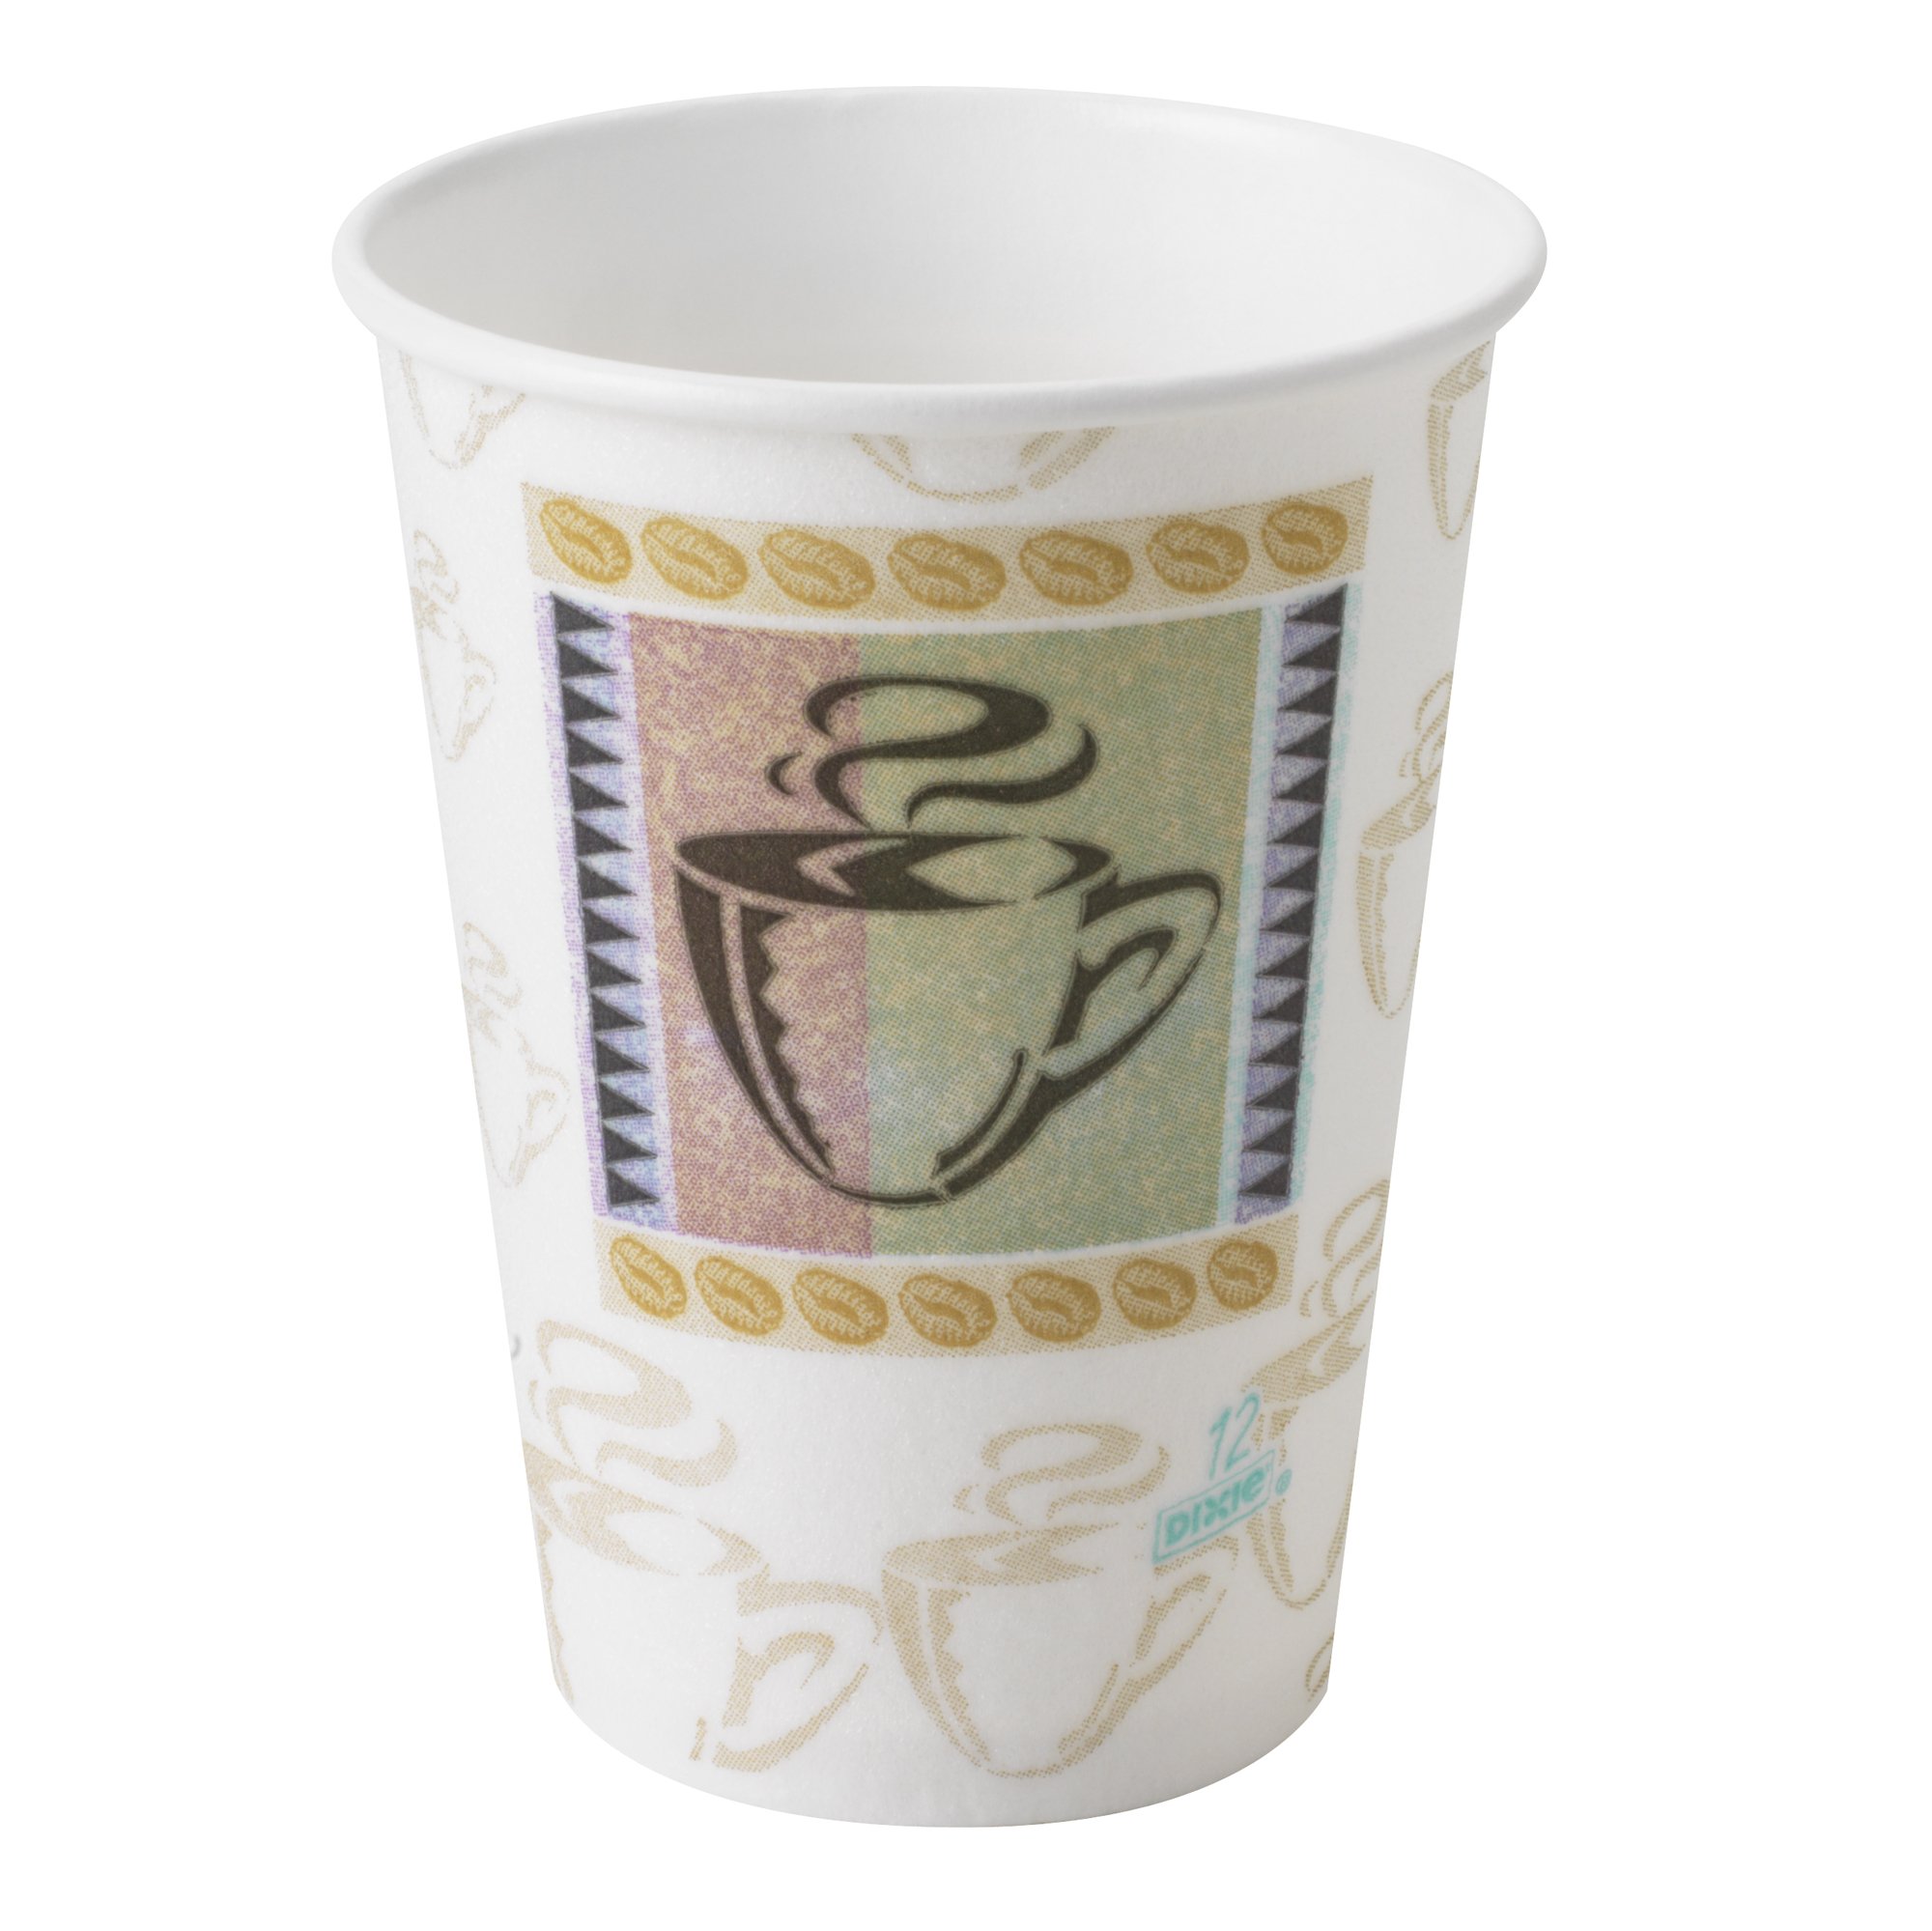 Georgia-Pacific PerfecTouch 5342DX WiseSize Coffee Dreams Insulated Paper Cup, 12oz Capacity (Case of 20 Sleeves, 25 per Sleeve)